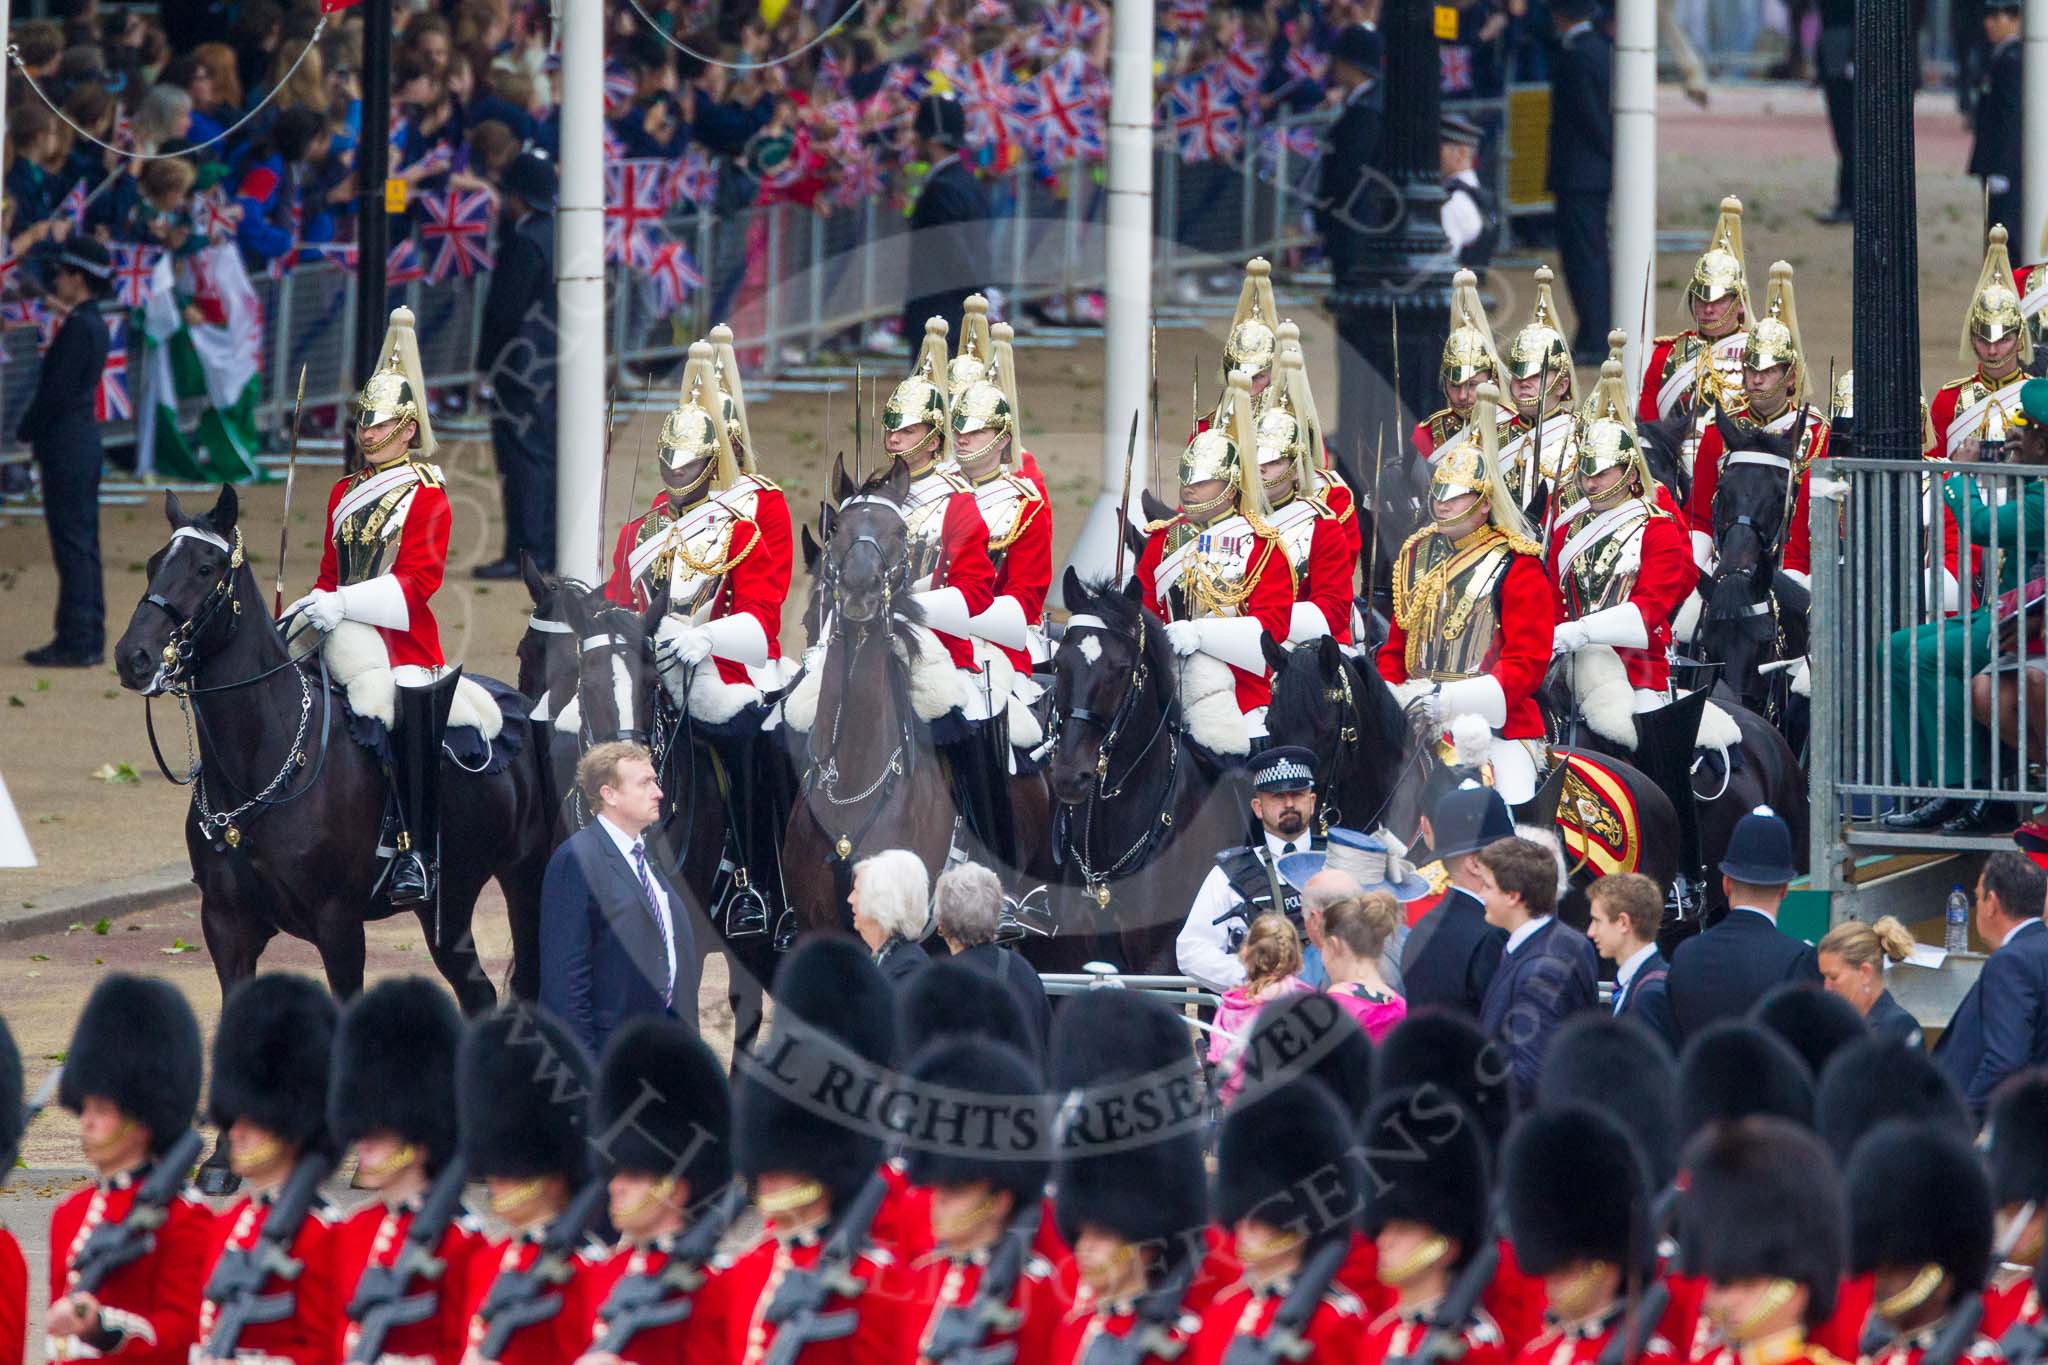 Trooping the Colour 2015. Image #220, 13 June 2015 10:56 Horse Guards Parade, London, UK